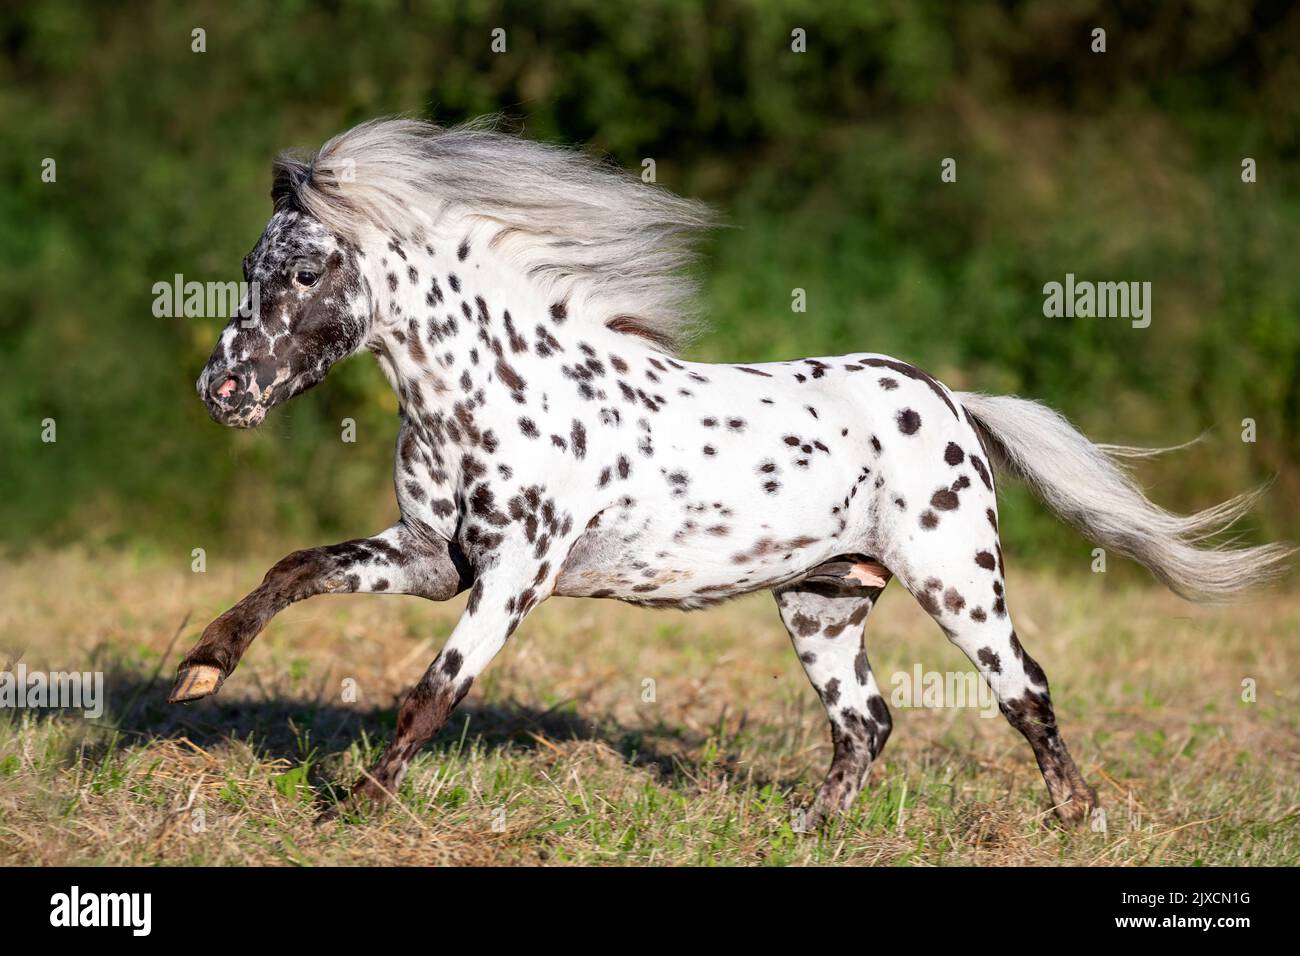 Falabella Miniature Horse. Leopard-spotted gelding galloping on a meadow. Austria Stock Photo